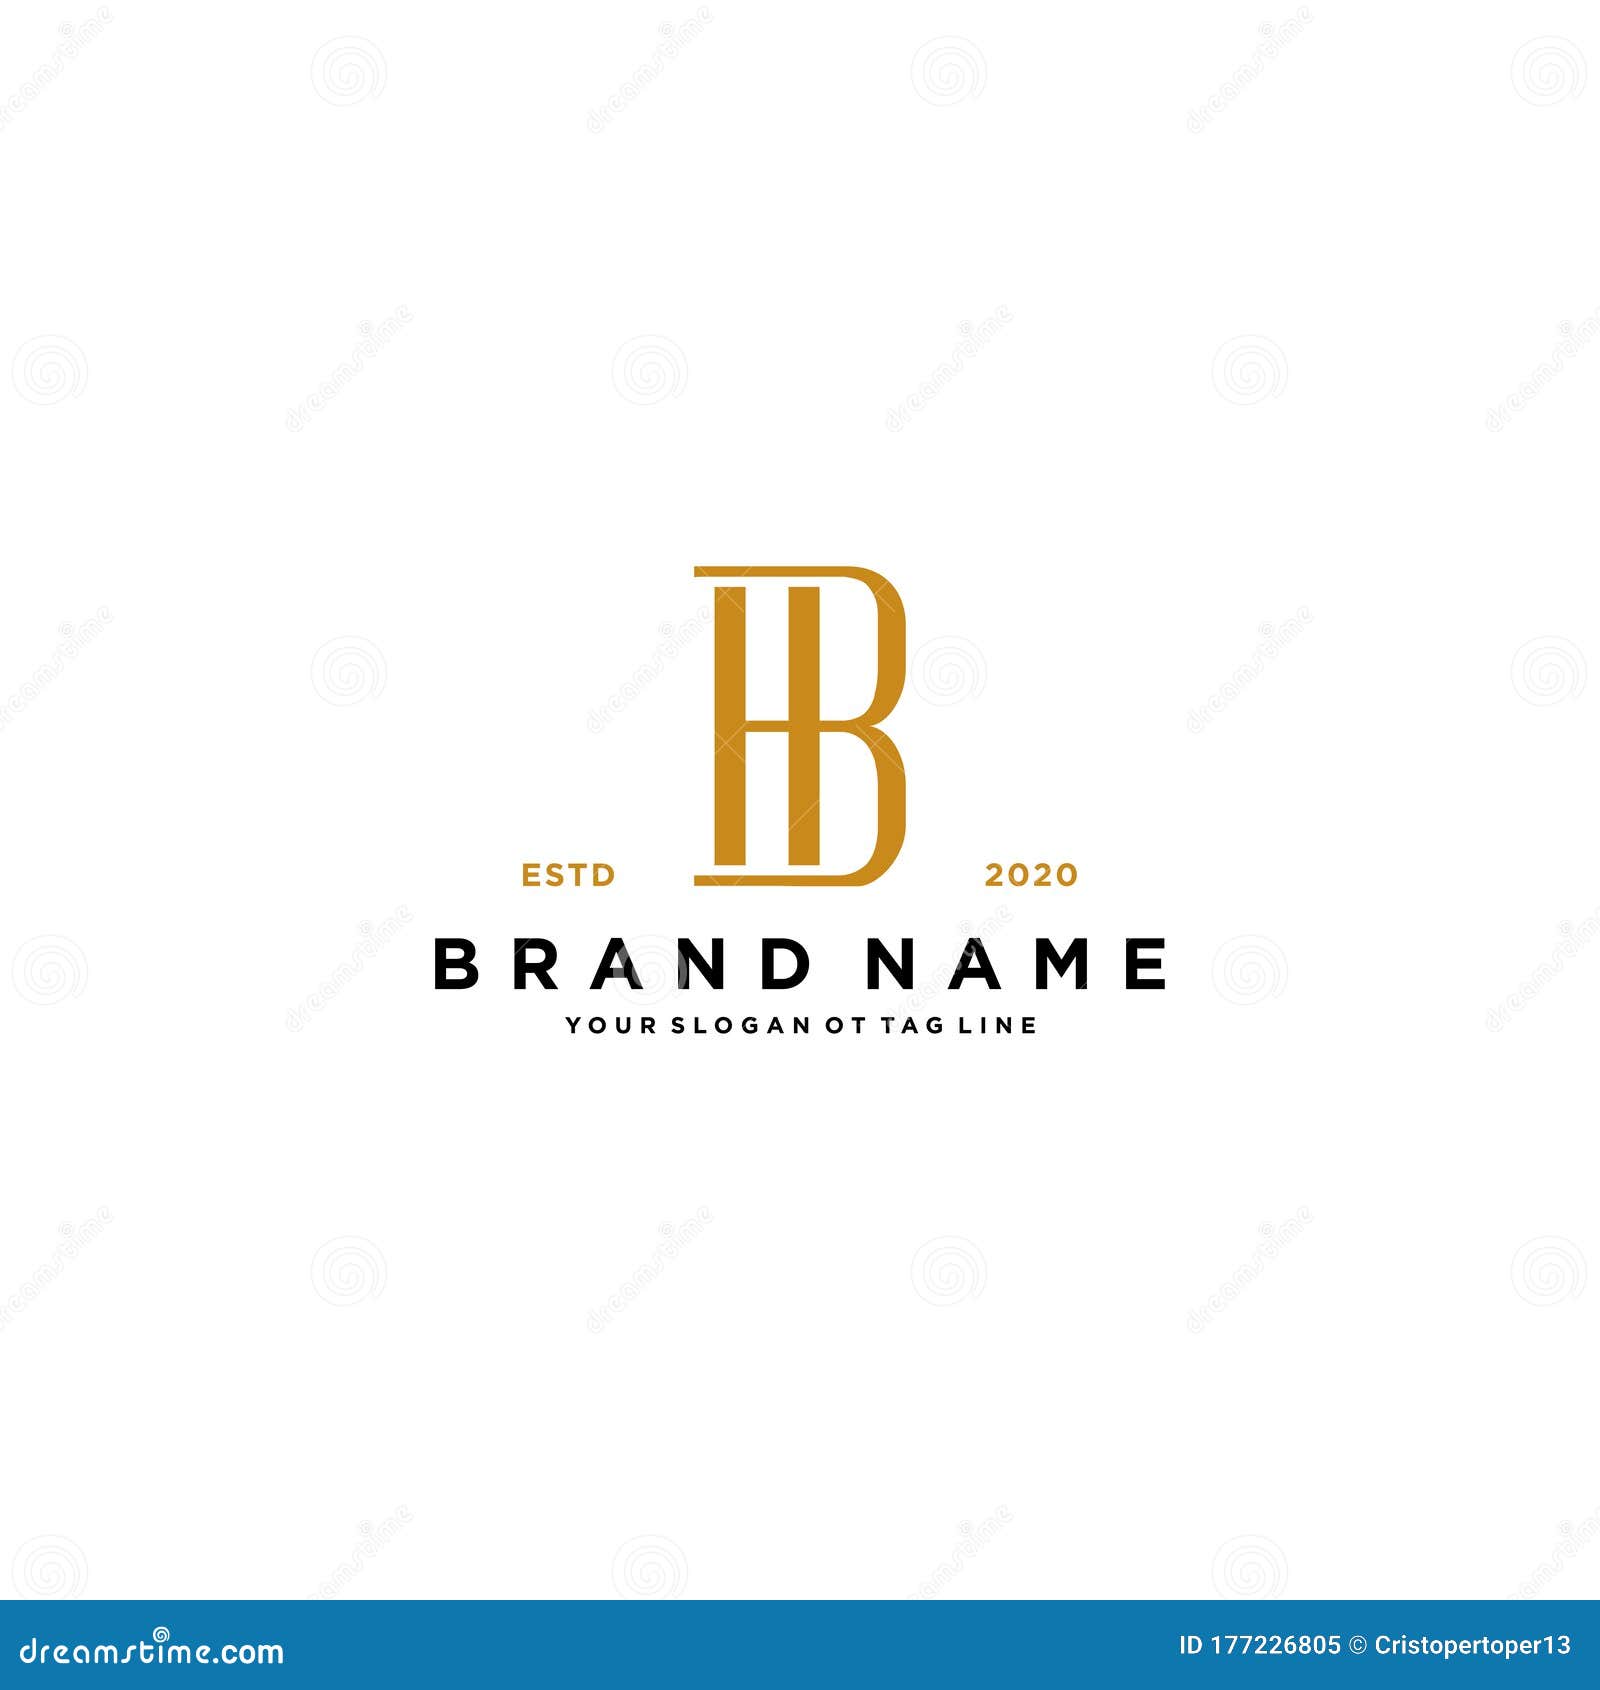 Premium Vector  Lv linked logo for business and company identity creative  letter lv logo vector